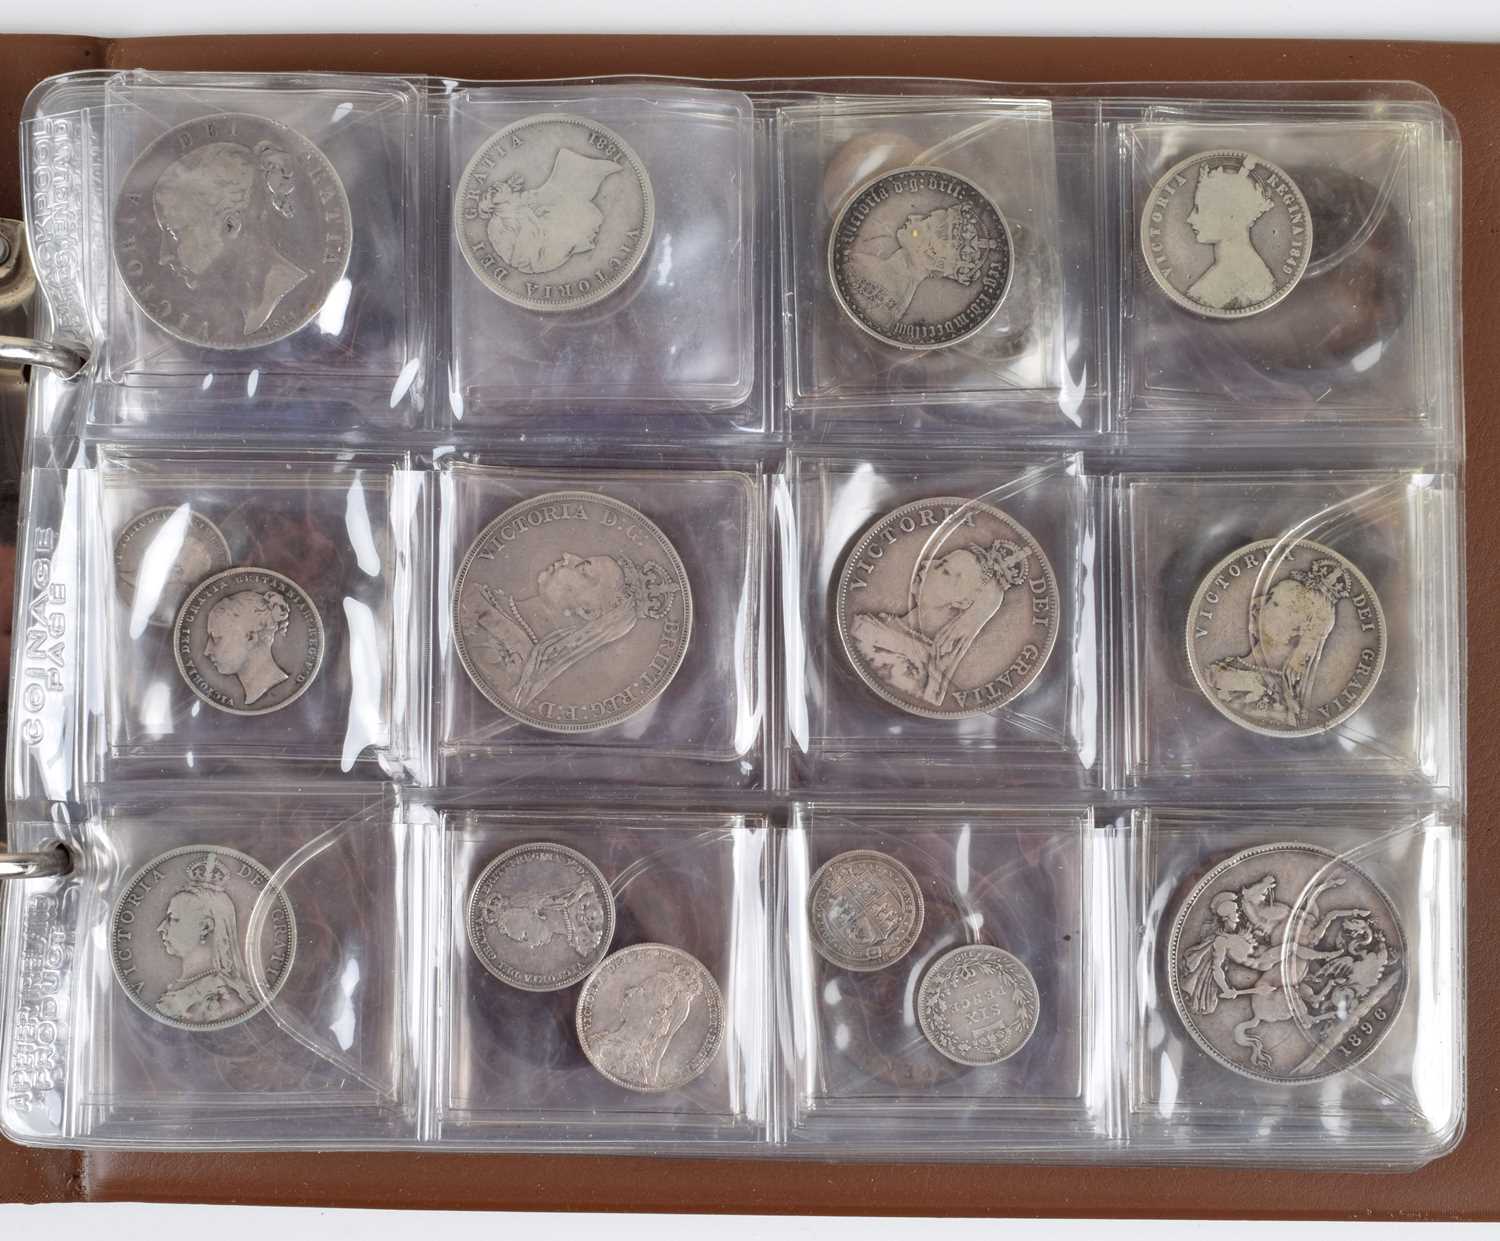 One album of historical British coinage dating from William and Mary through to George V. - Image 13 of 22